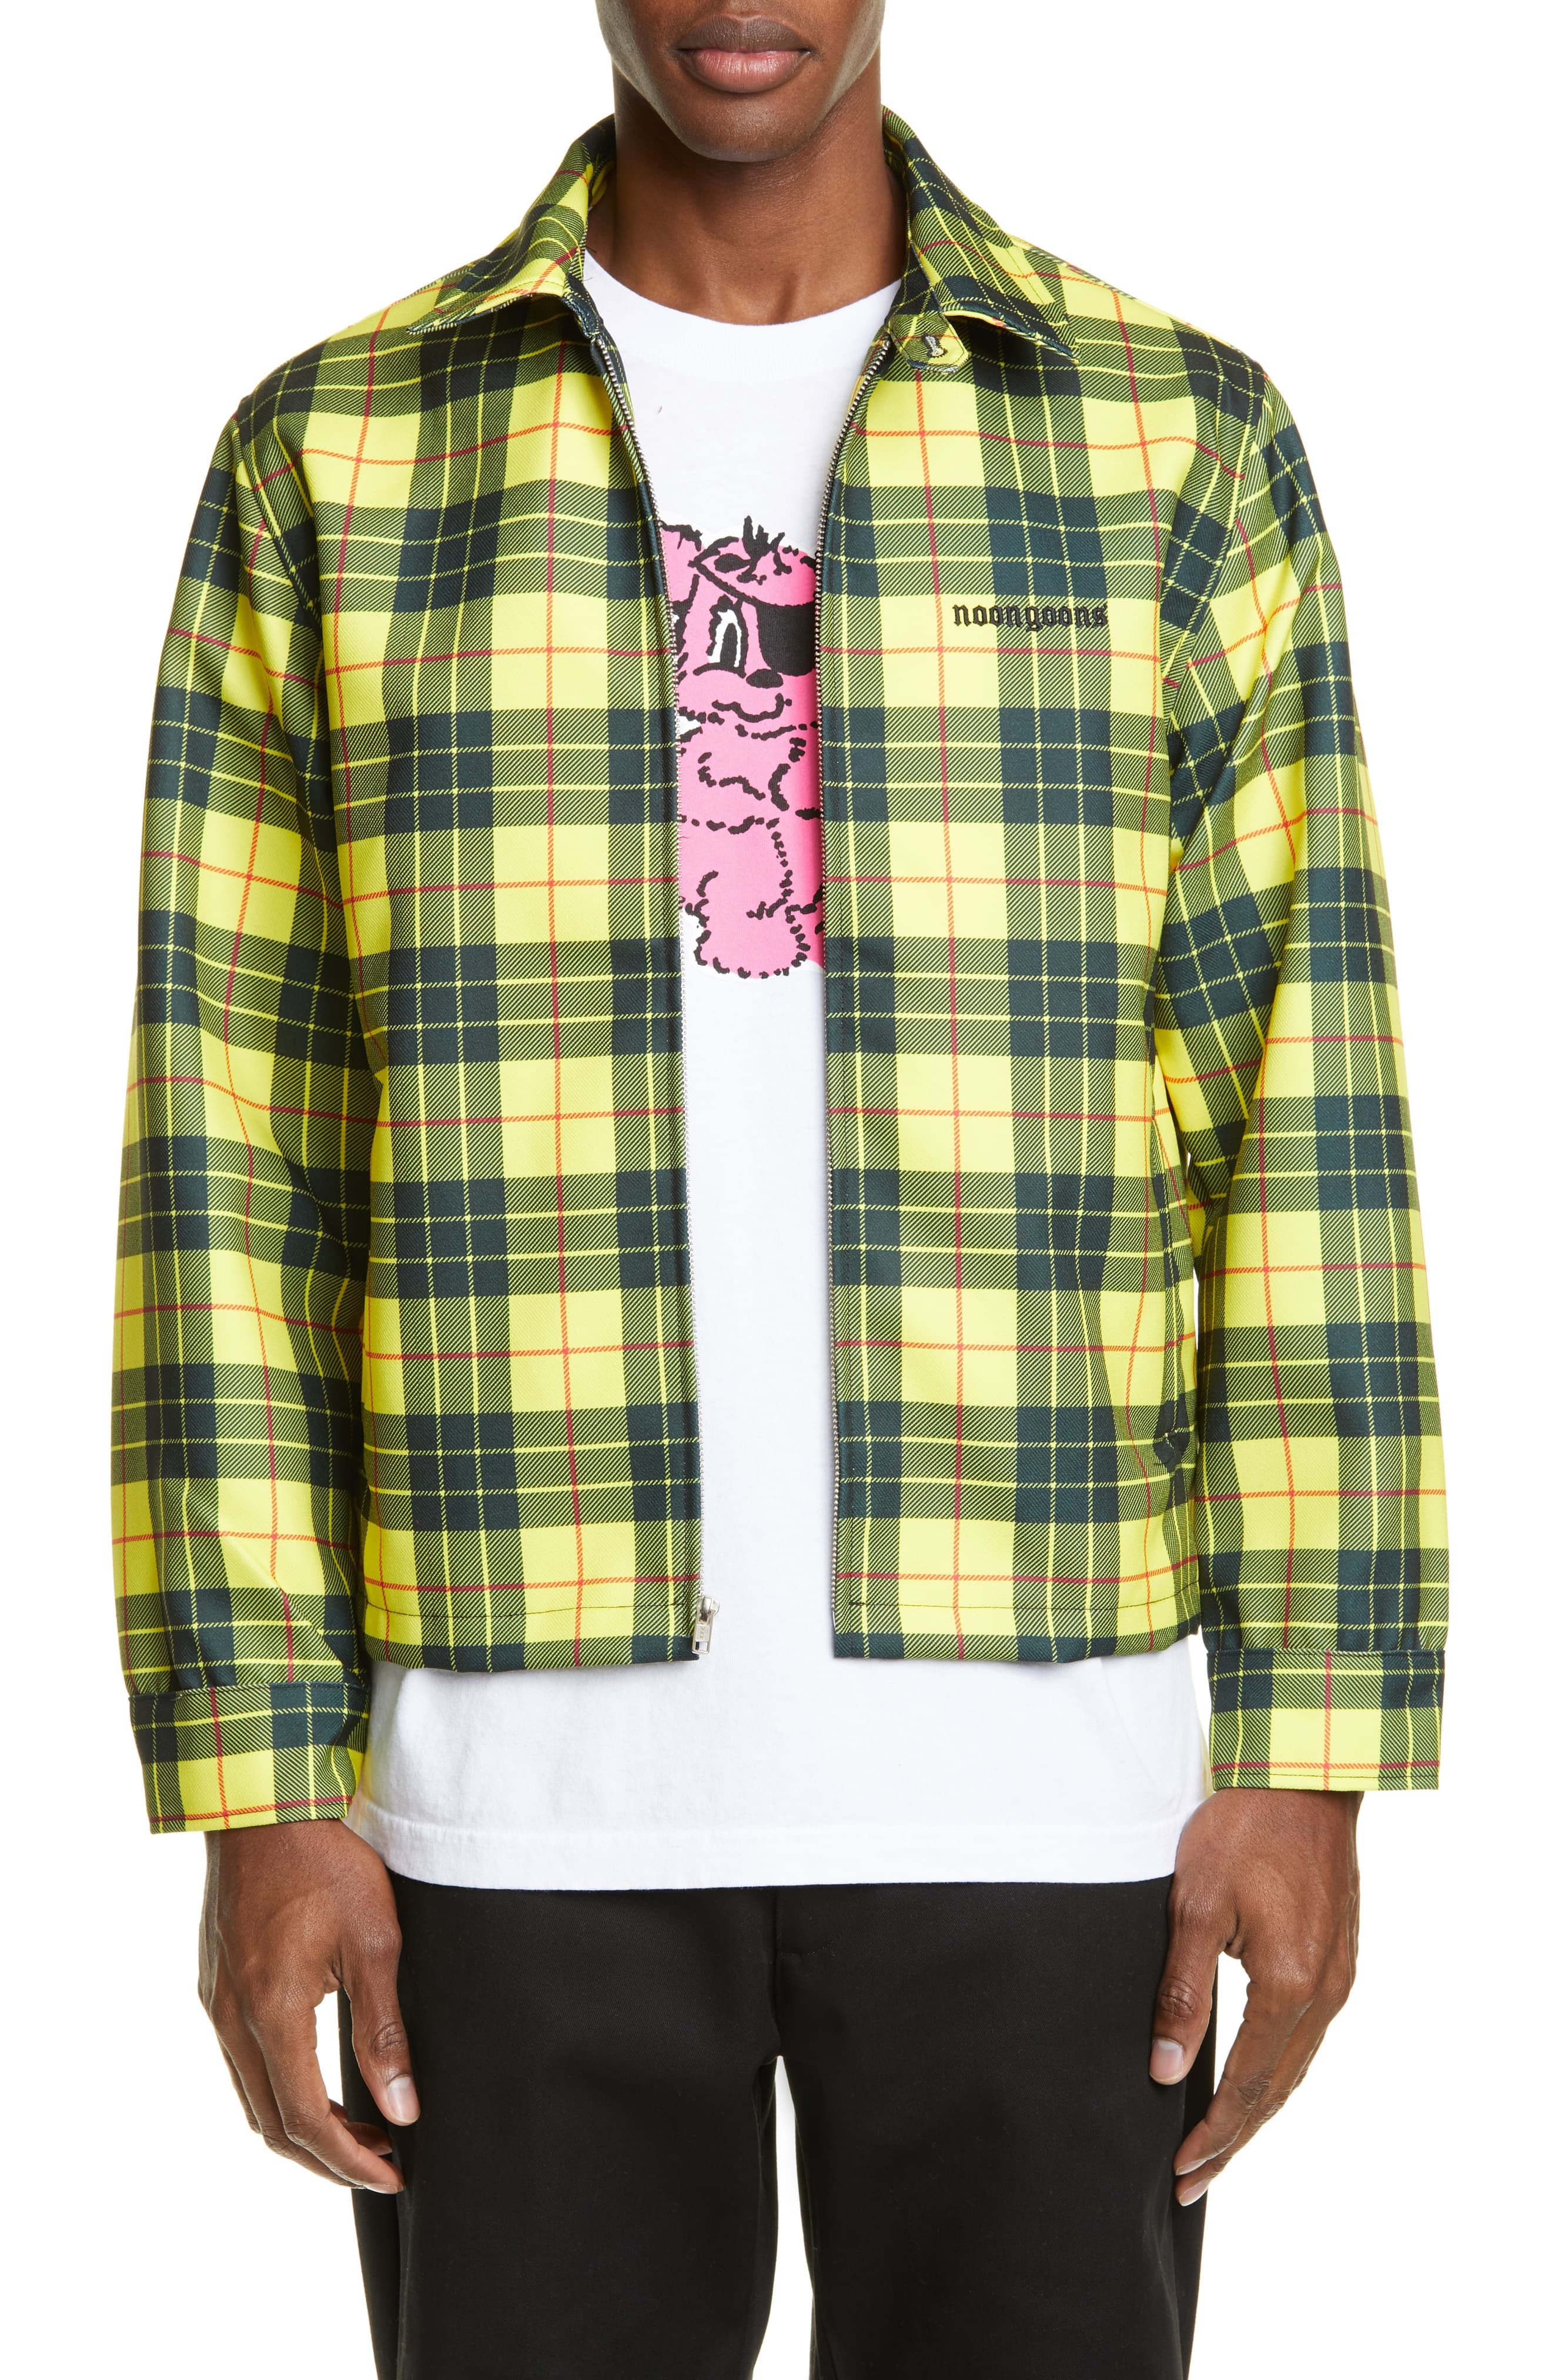 Noon Goons Singled Out Jacket, $159 | Nordstrom | Lookastic